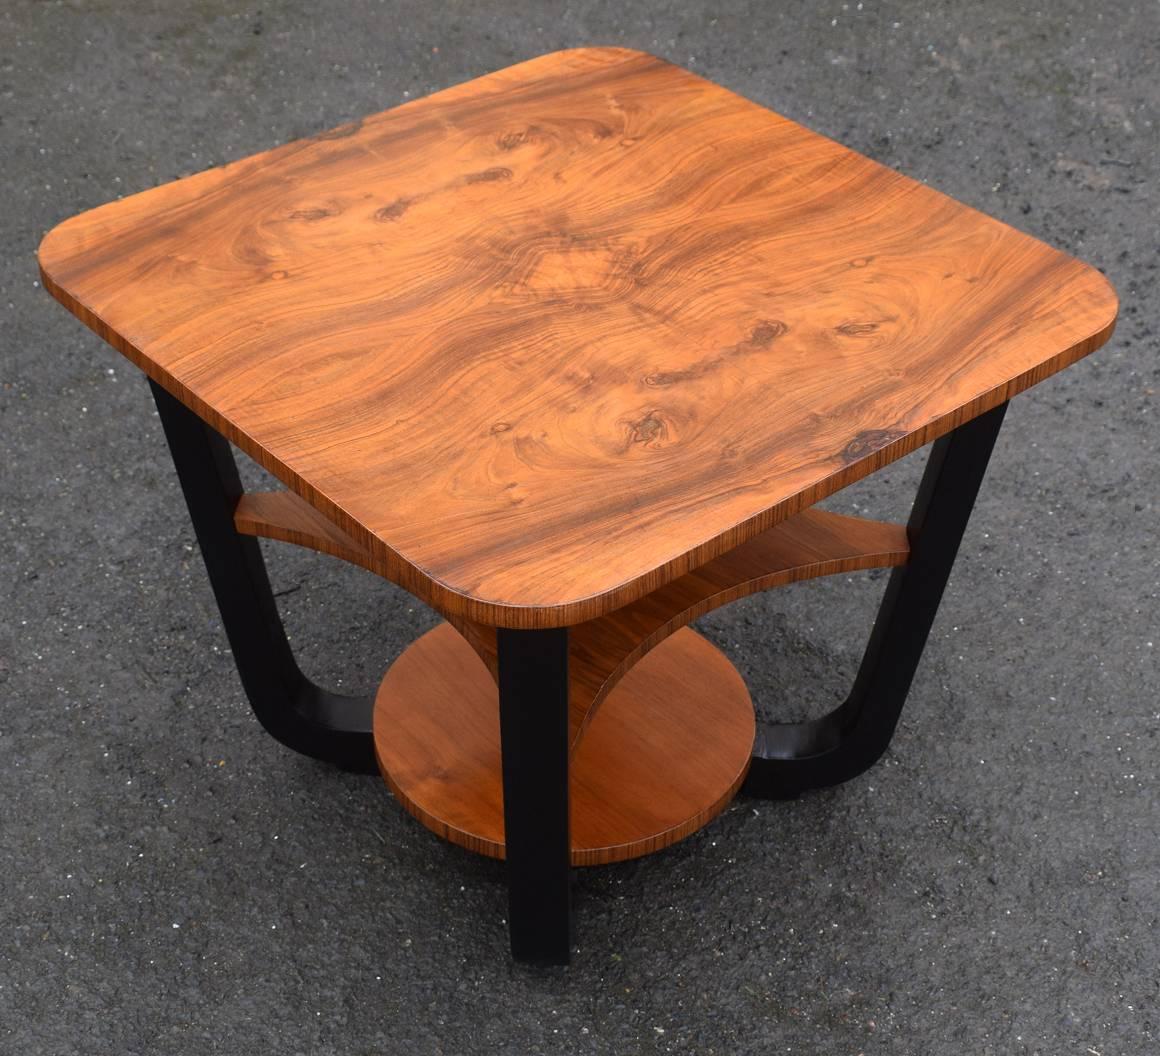 20th Century Art Deco Occasional Table in Figured Walnut, English , circa 1930 For Sale